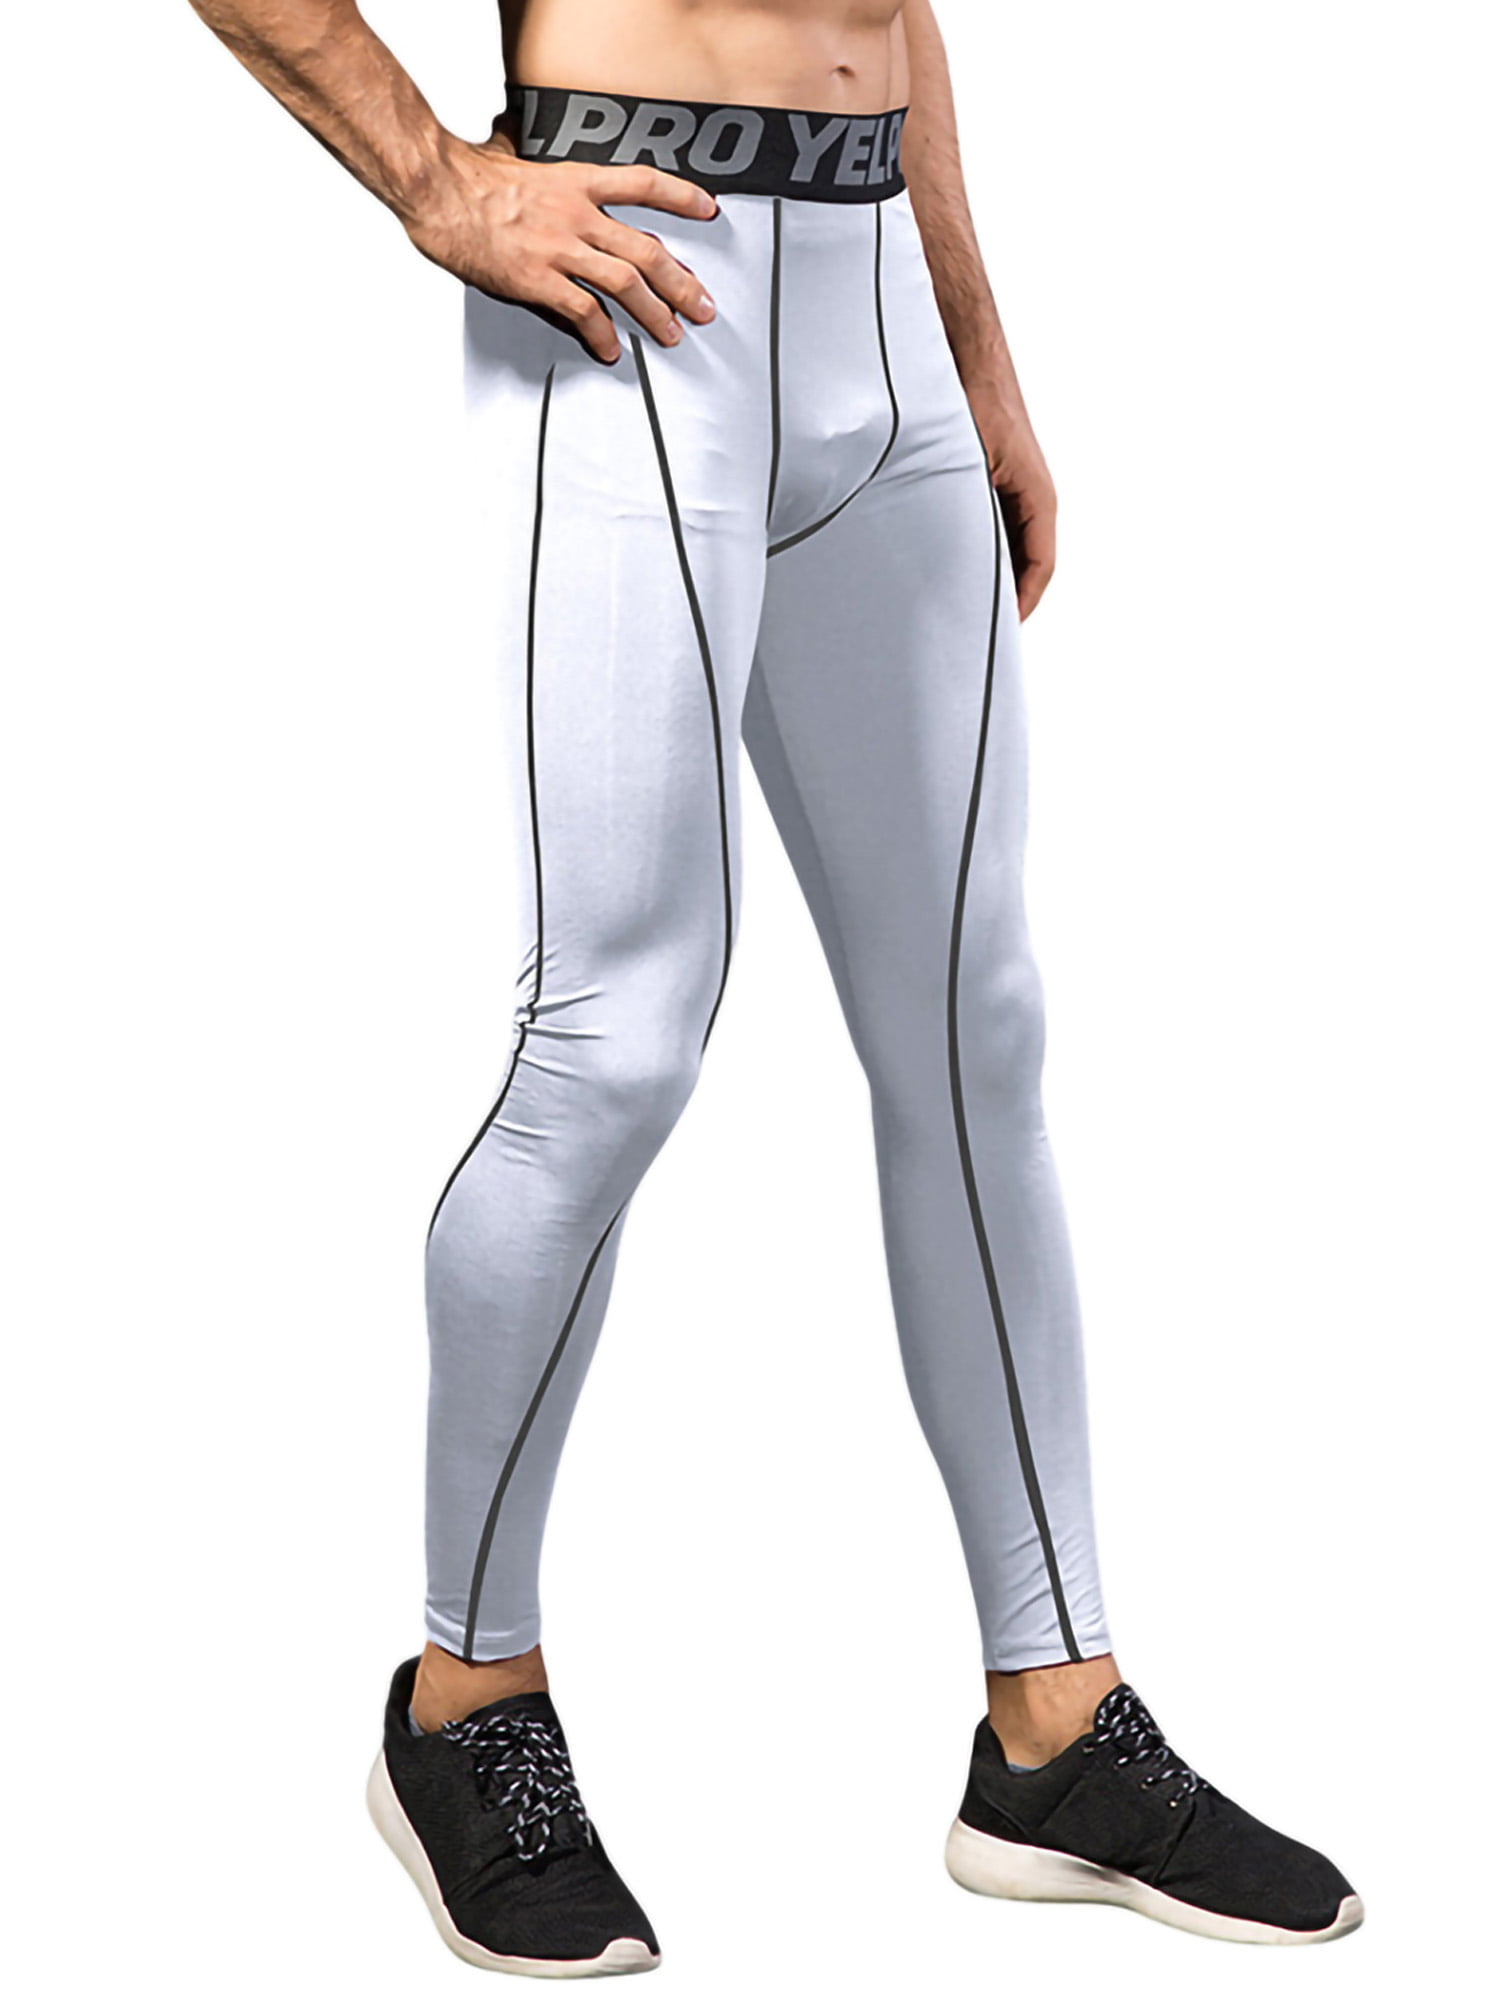 Base layer long tights in color white